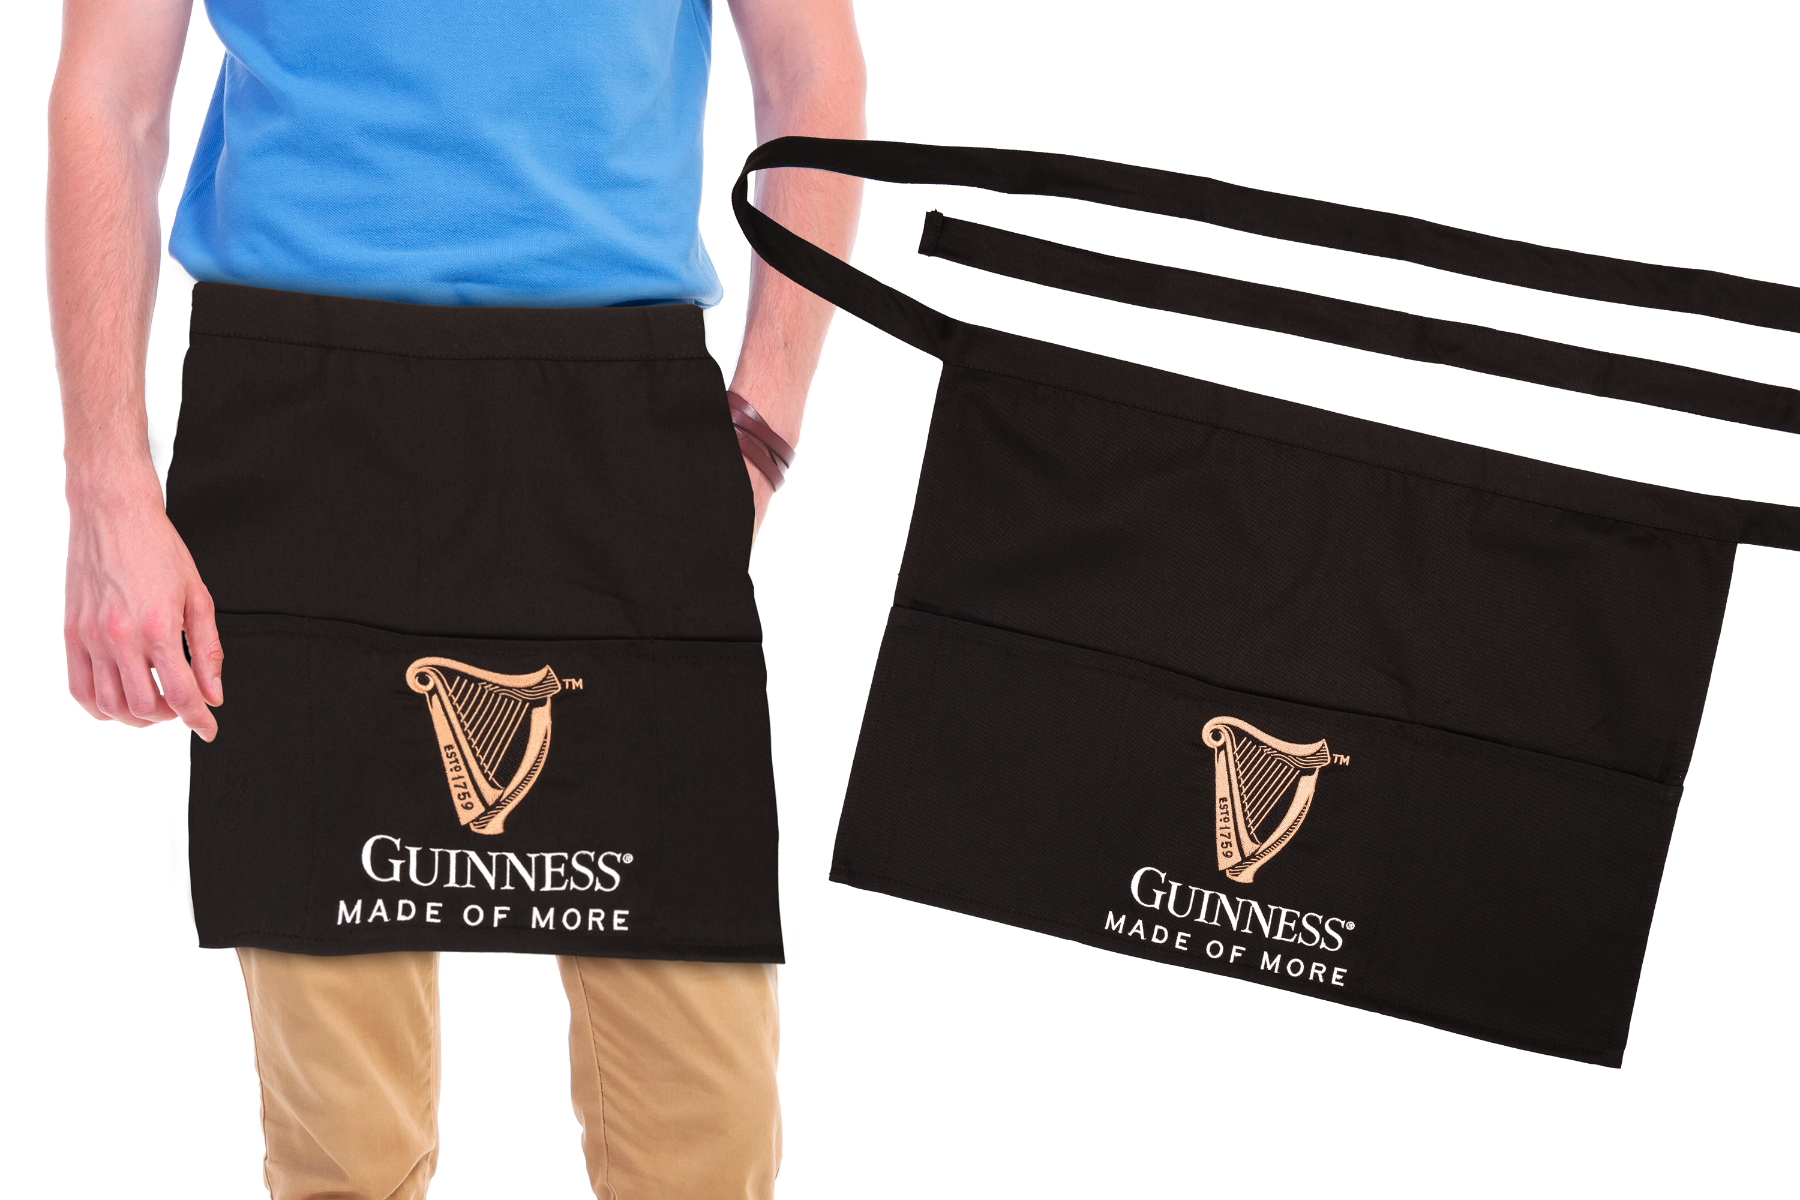 Product Description: This Guinness Bar Tender Half Apron is a must-have for any home bar or Guinness lover. Featuring the iconic Guinness logo, it adds a touch of style and practicality to your kitchen or barbecue sessions. (Brand Name: Guinness UK)